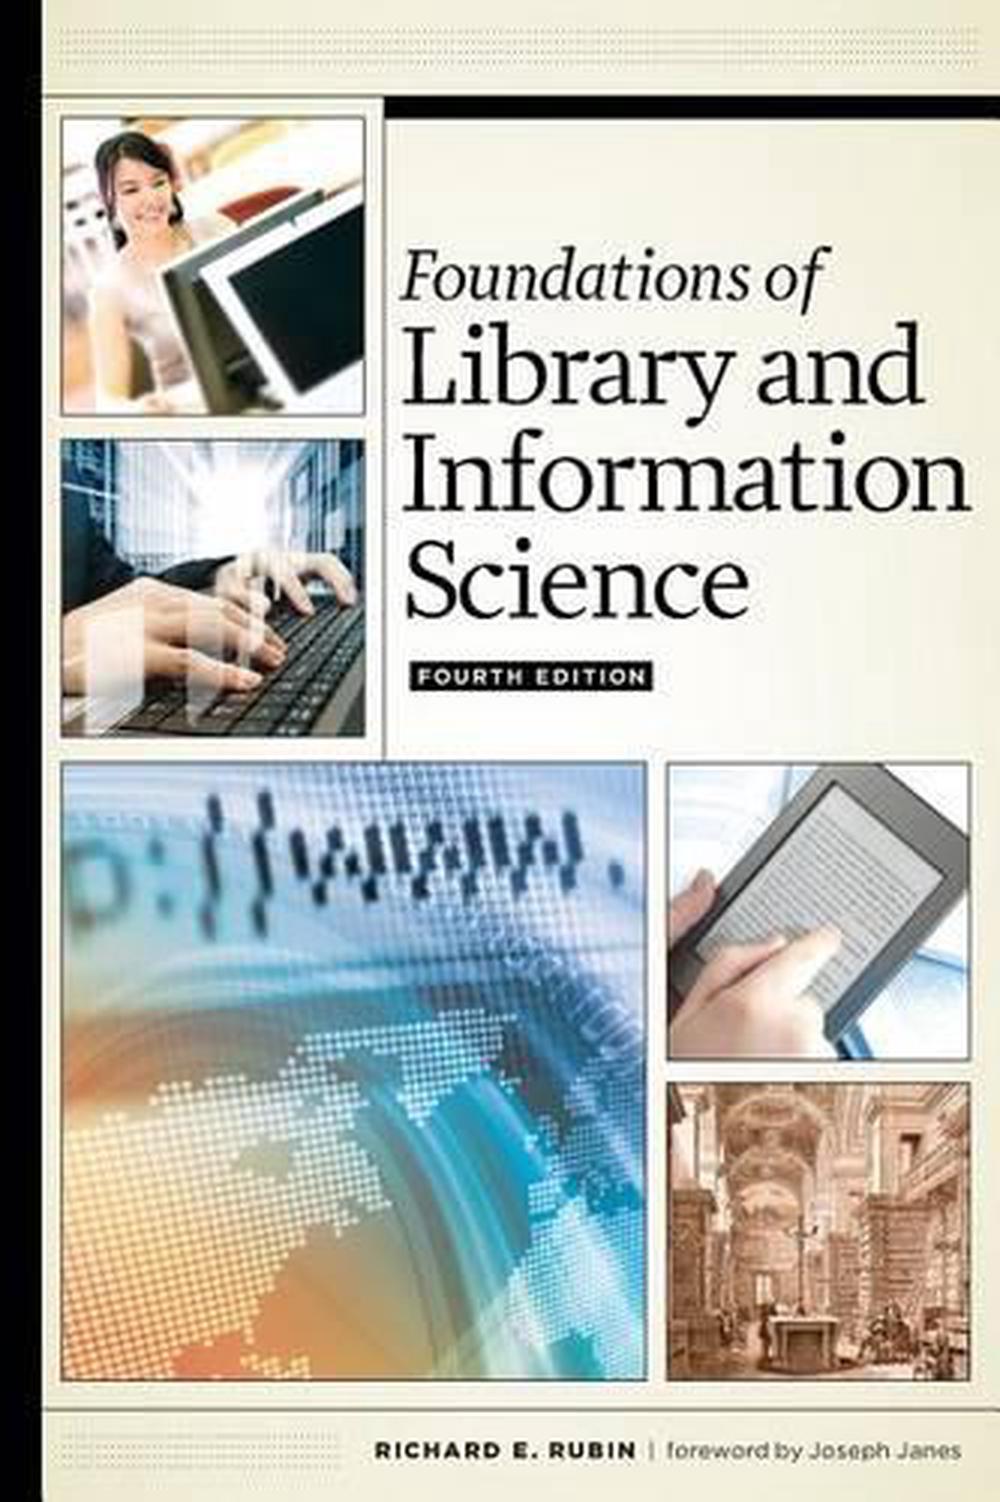 library and information science thesis topics